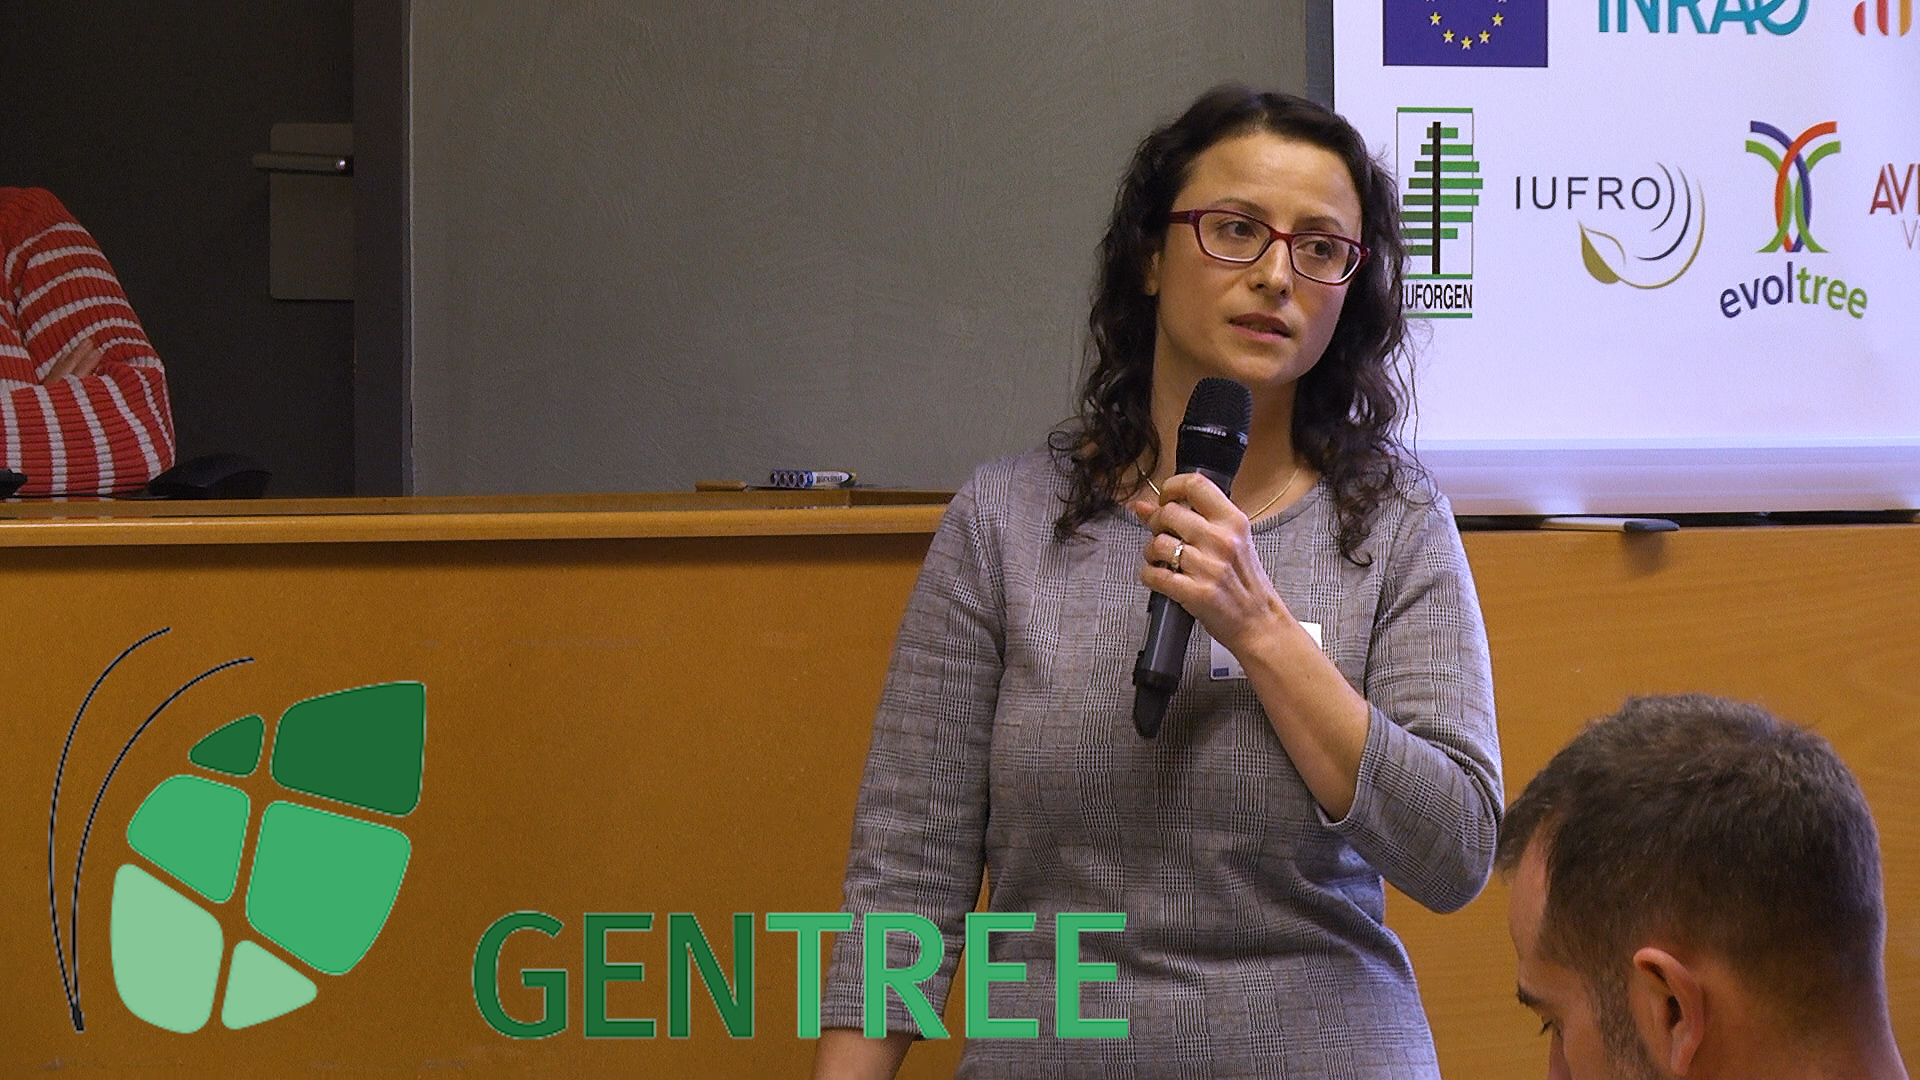 [COLLOQUE] GENTREE Final Conference 27-31 January 2020 séance 28